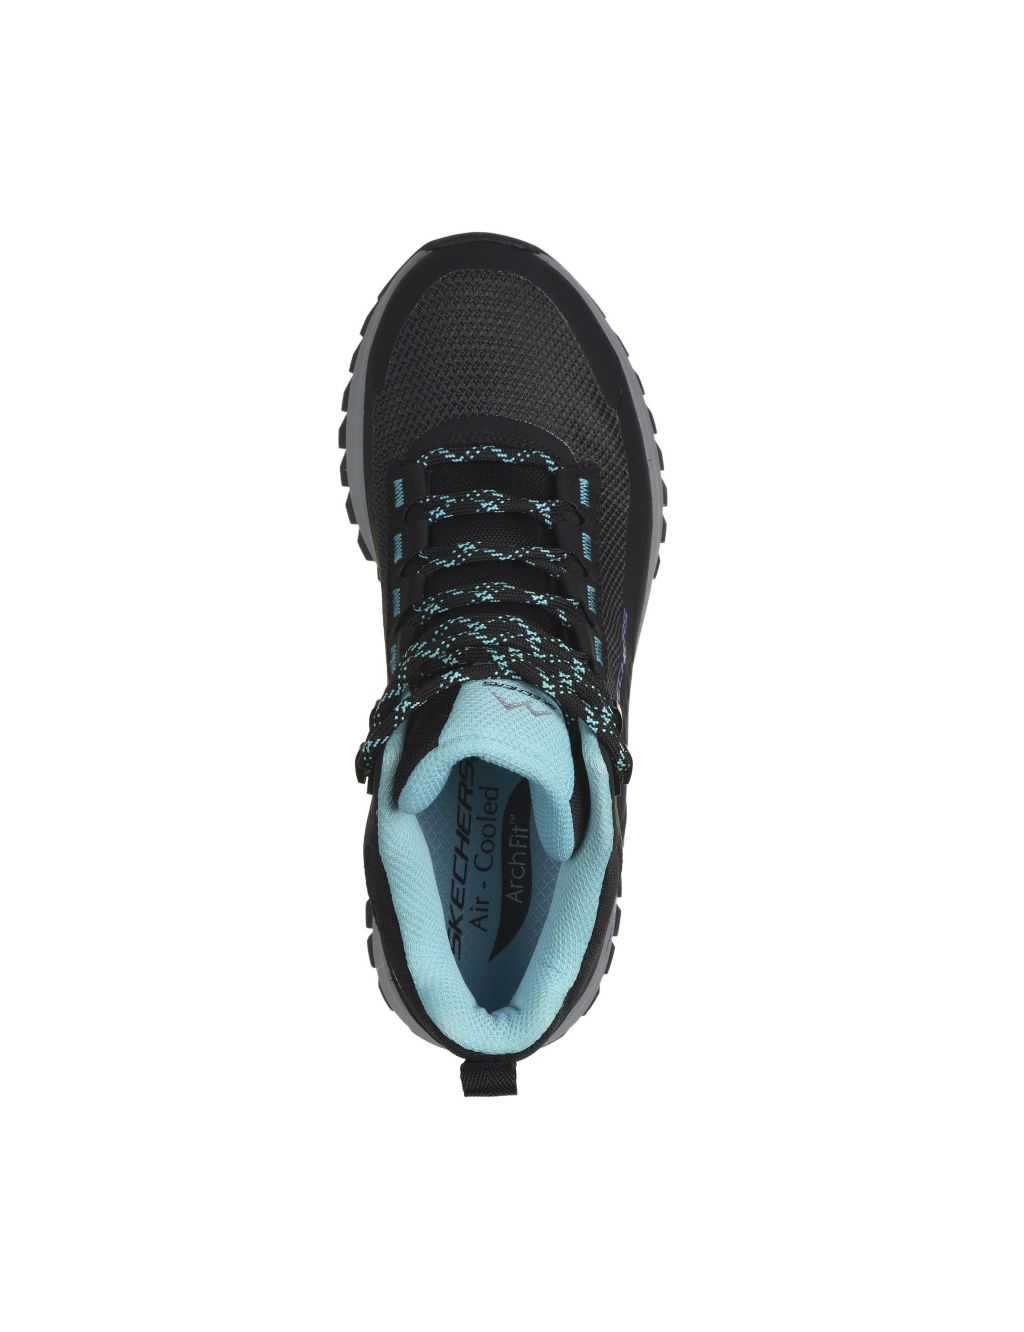 Arch Fit Discover Elevation Gain Trainers image 4